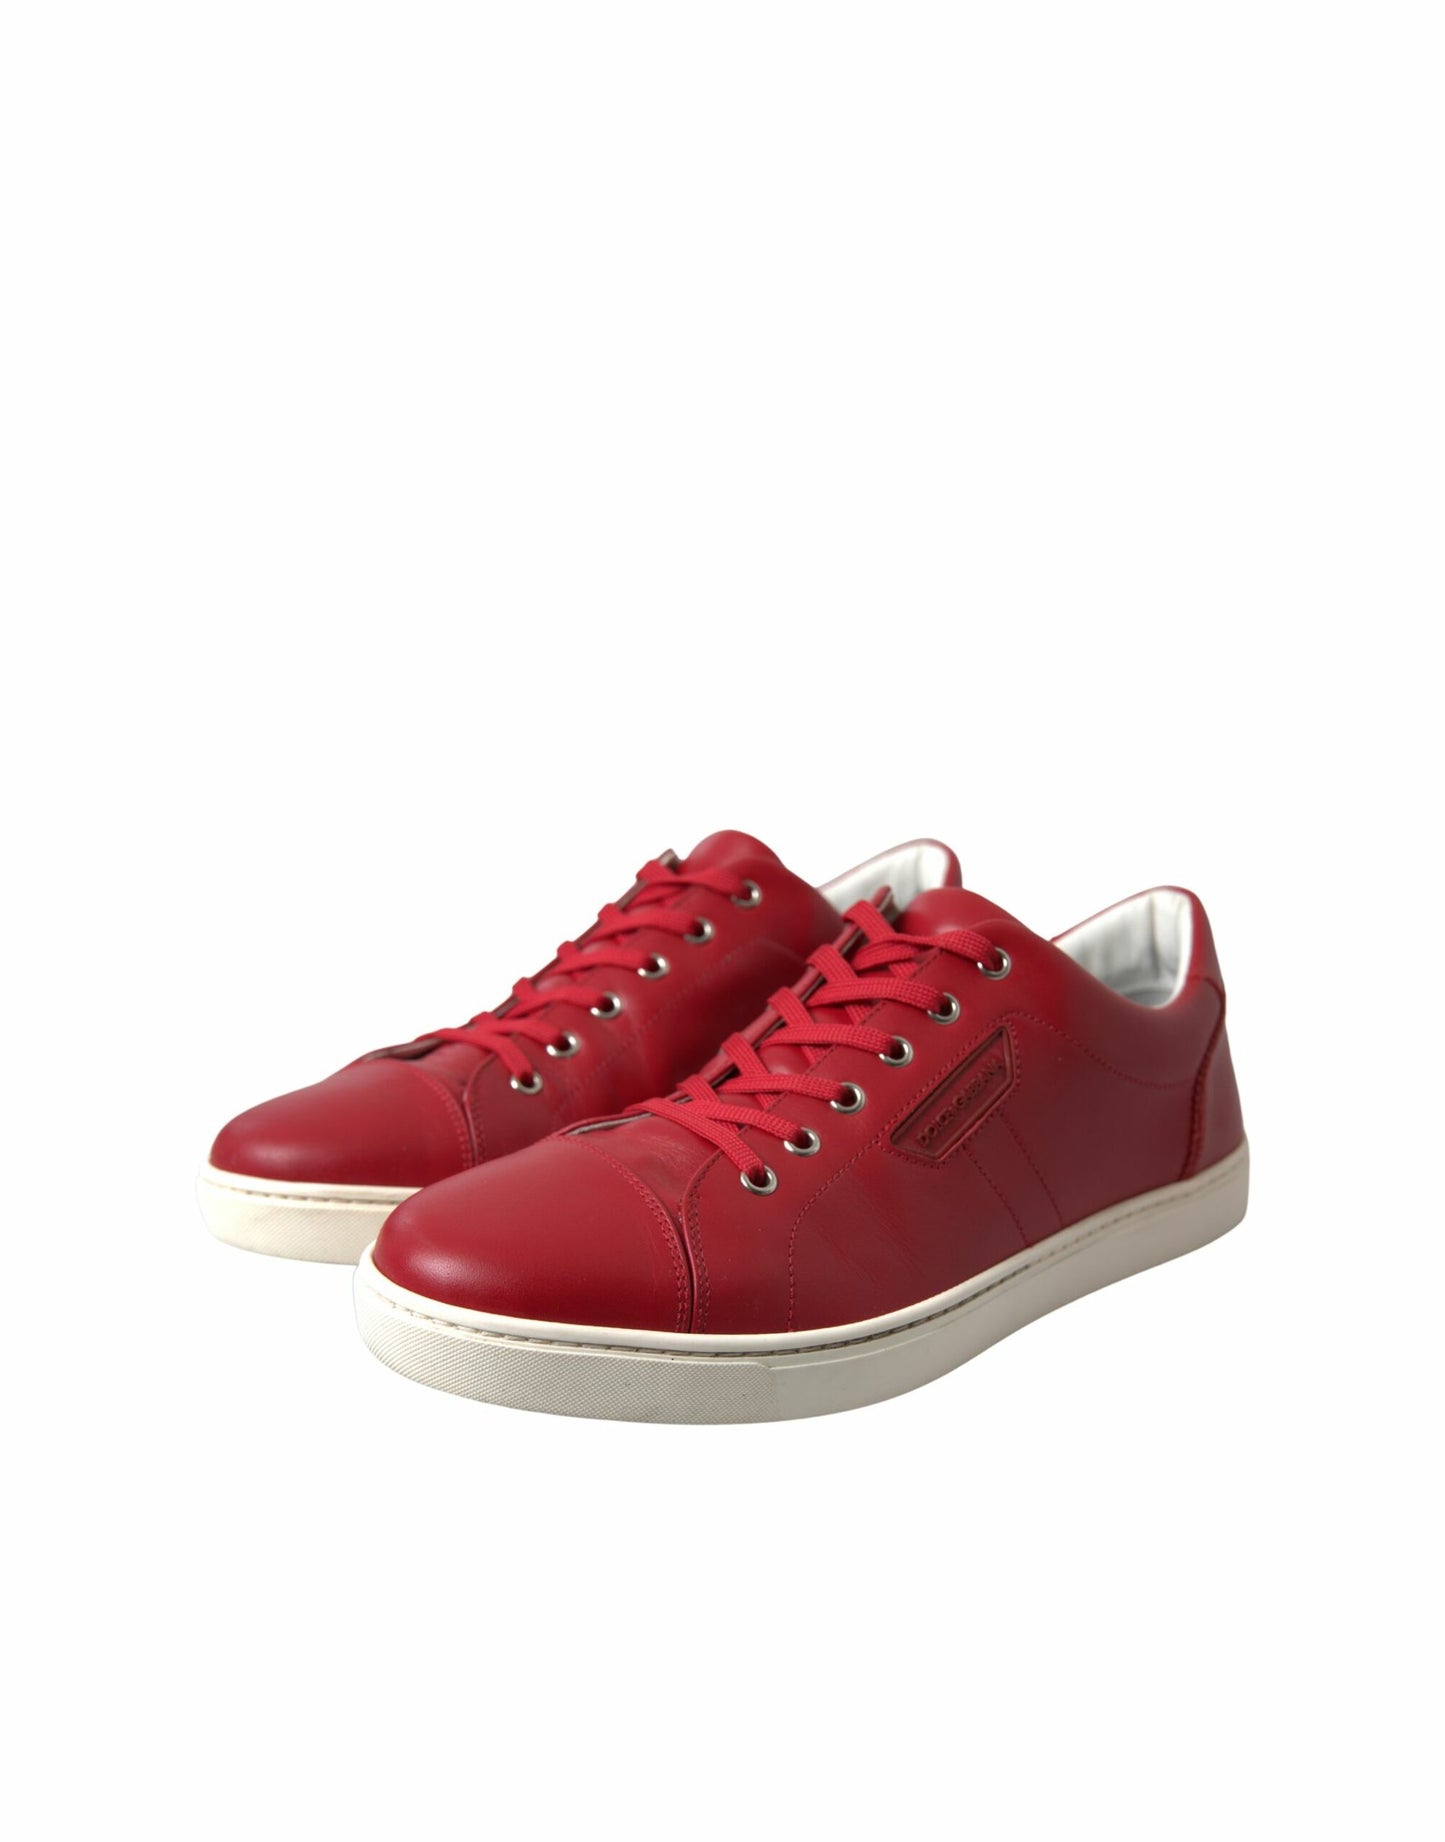 Dolce & Gabbana Elegant Red Leather Low Top Sneakers